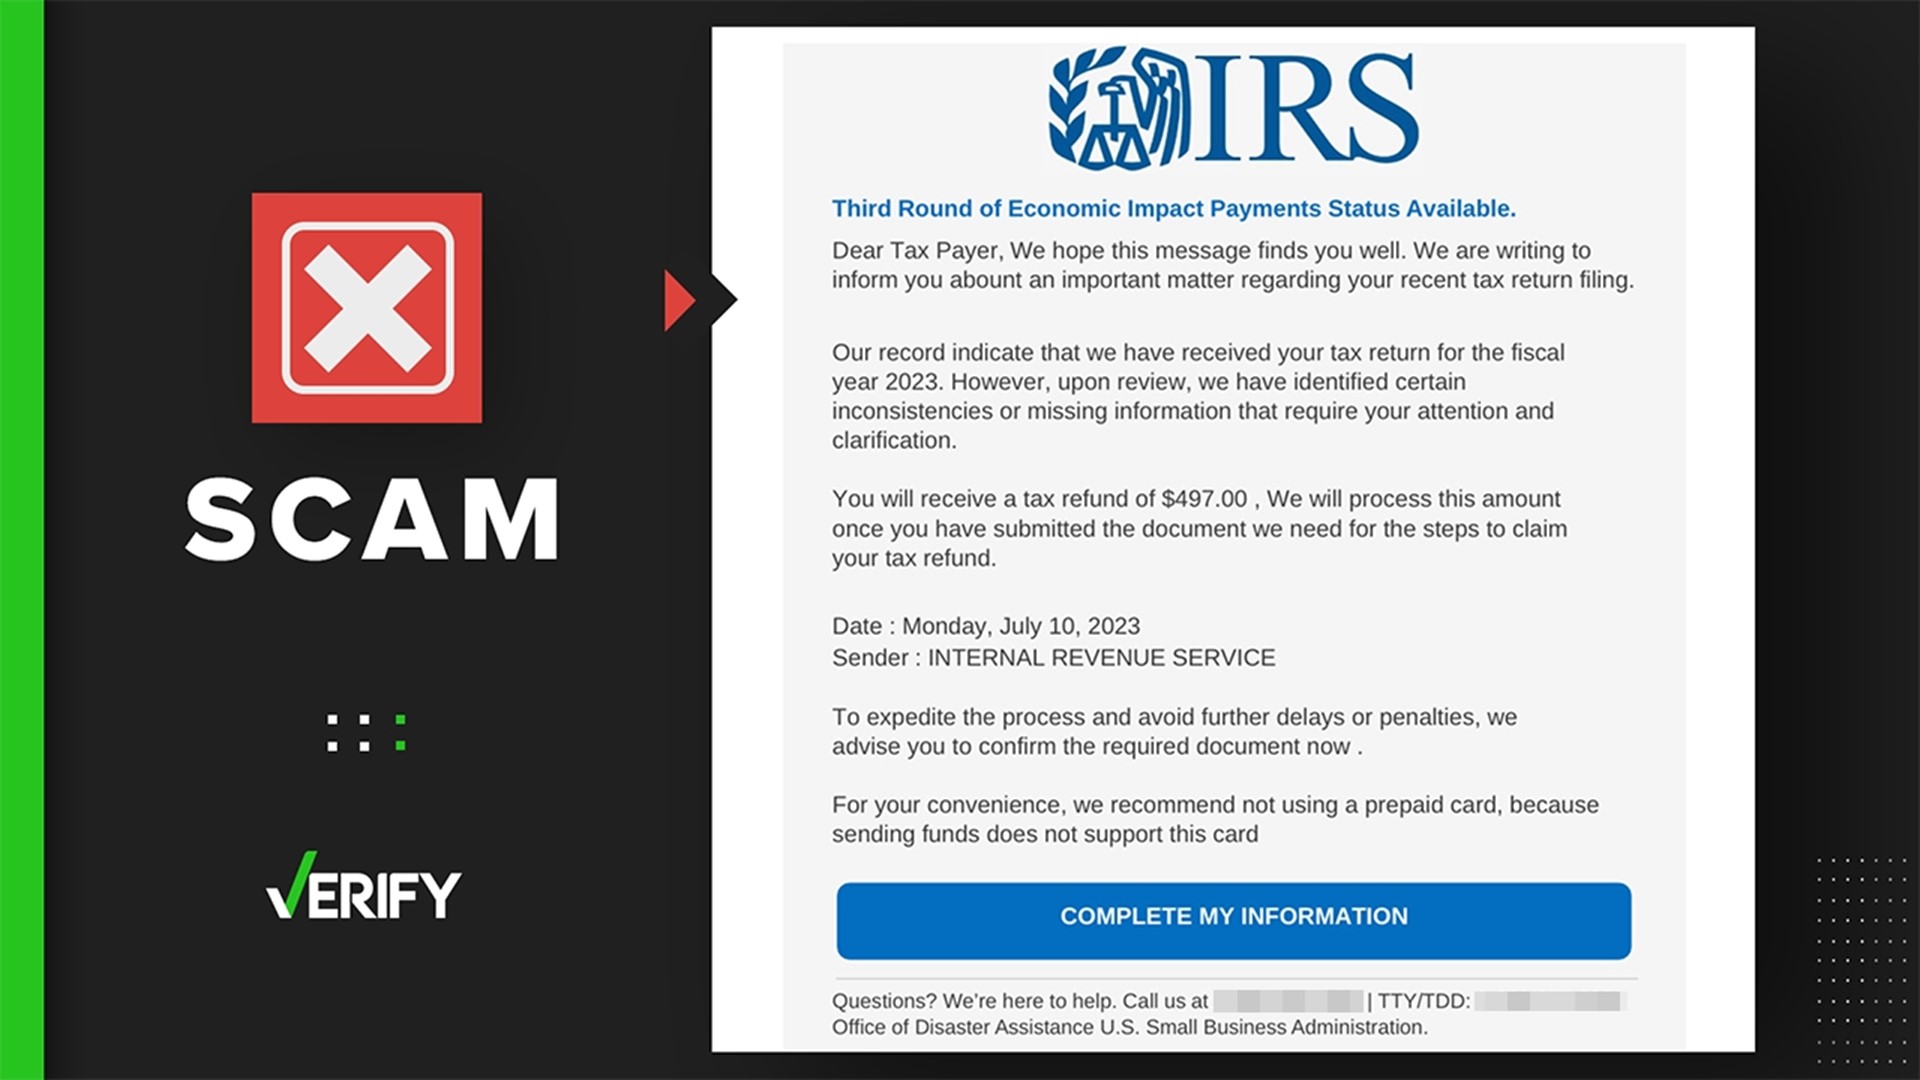 No, the IRS is not sending emails to taxpayers about a third round of